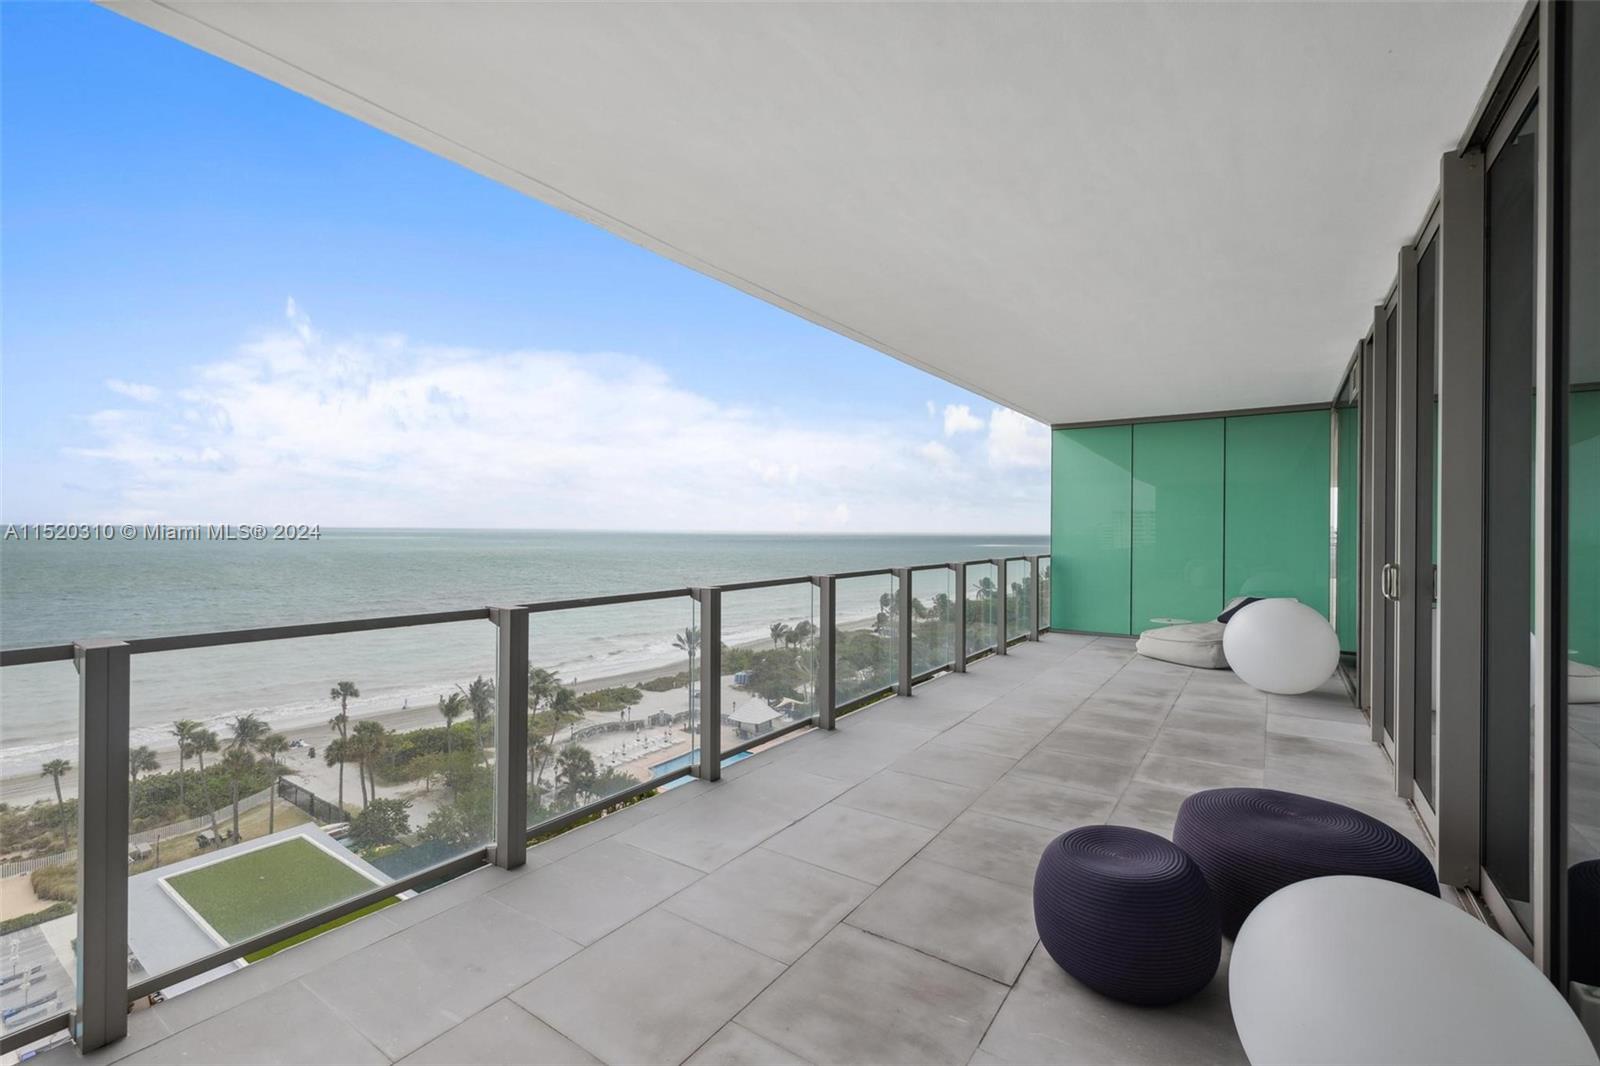 Property for Sale at 360 Ocean Dr 902S, Key Biscayne, Miami-Dade County, Florida - Bedrooms: 5 
Bathrooms: 6  - $8,500,000